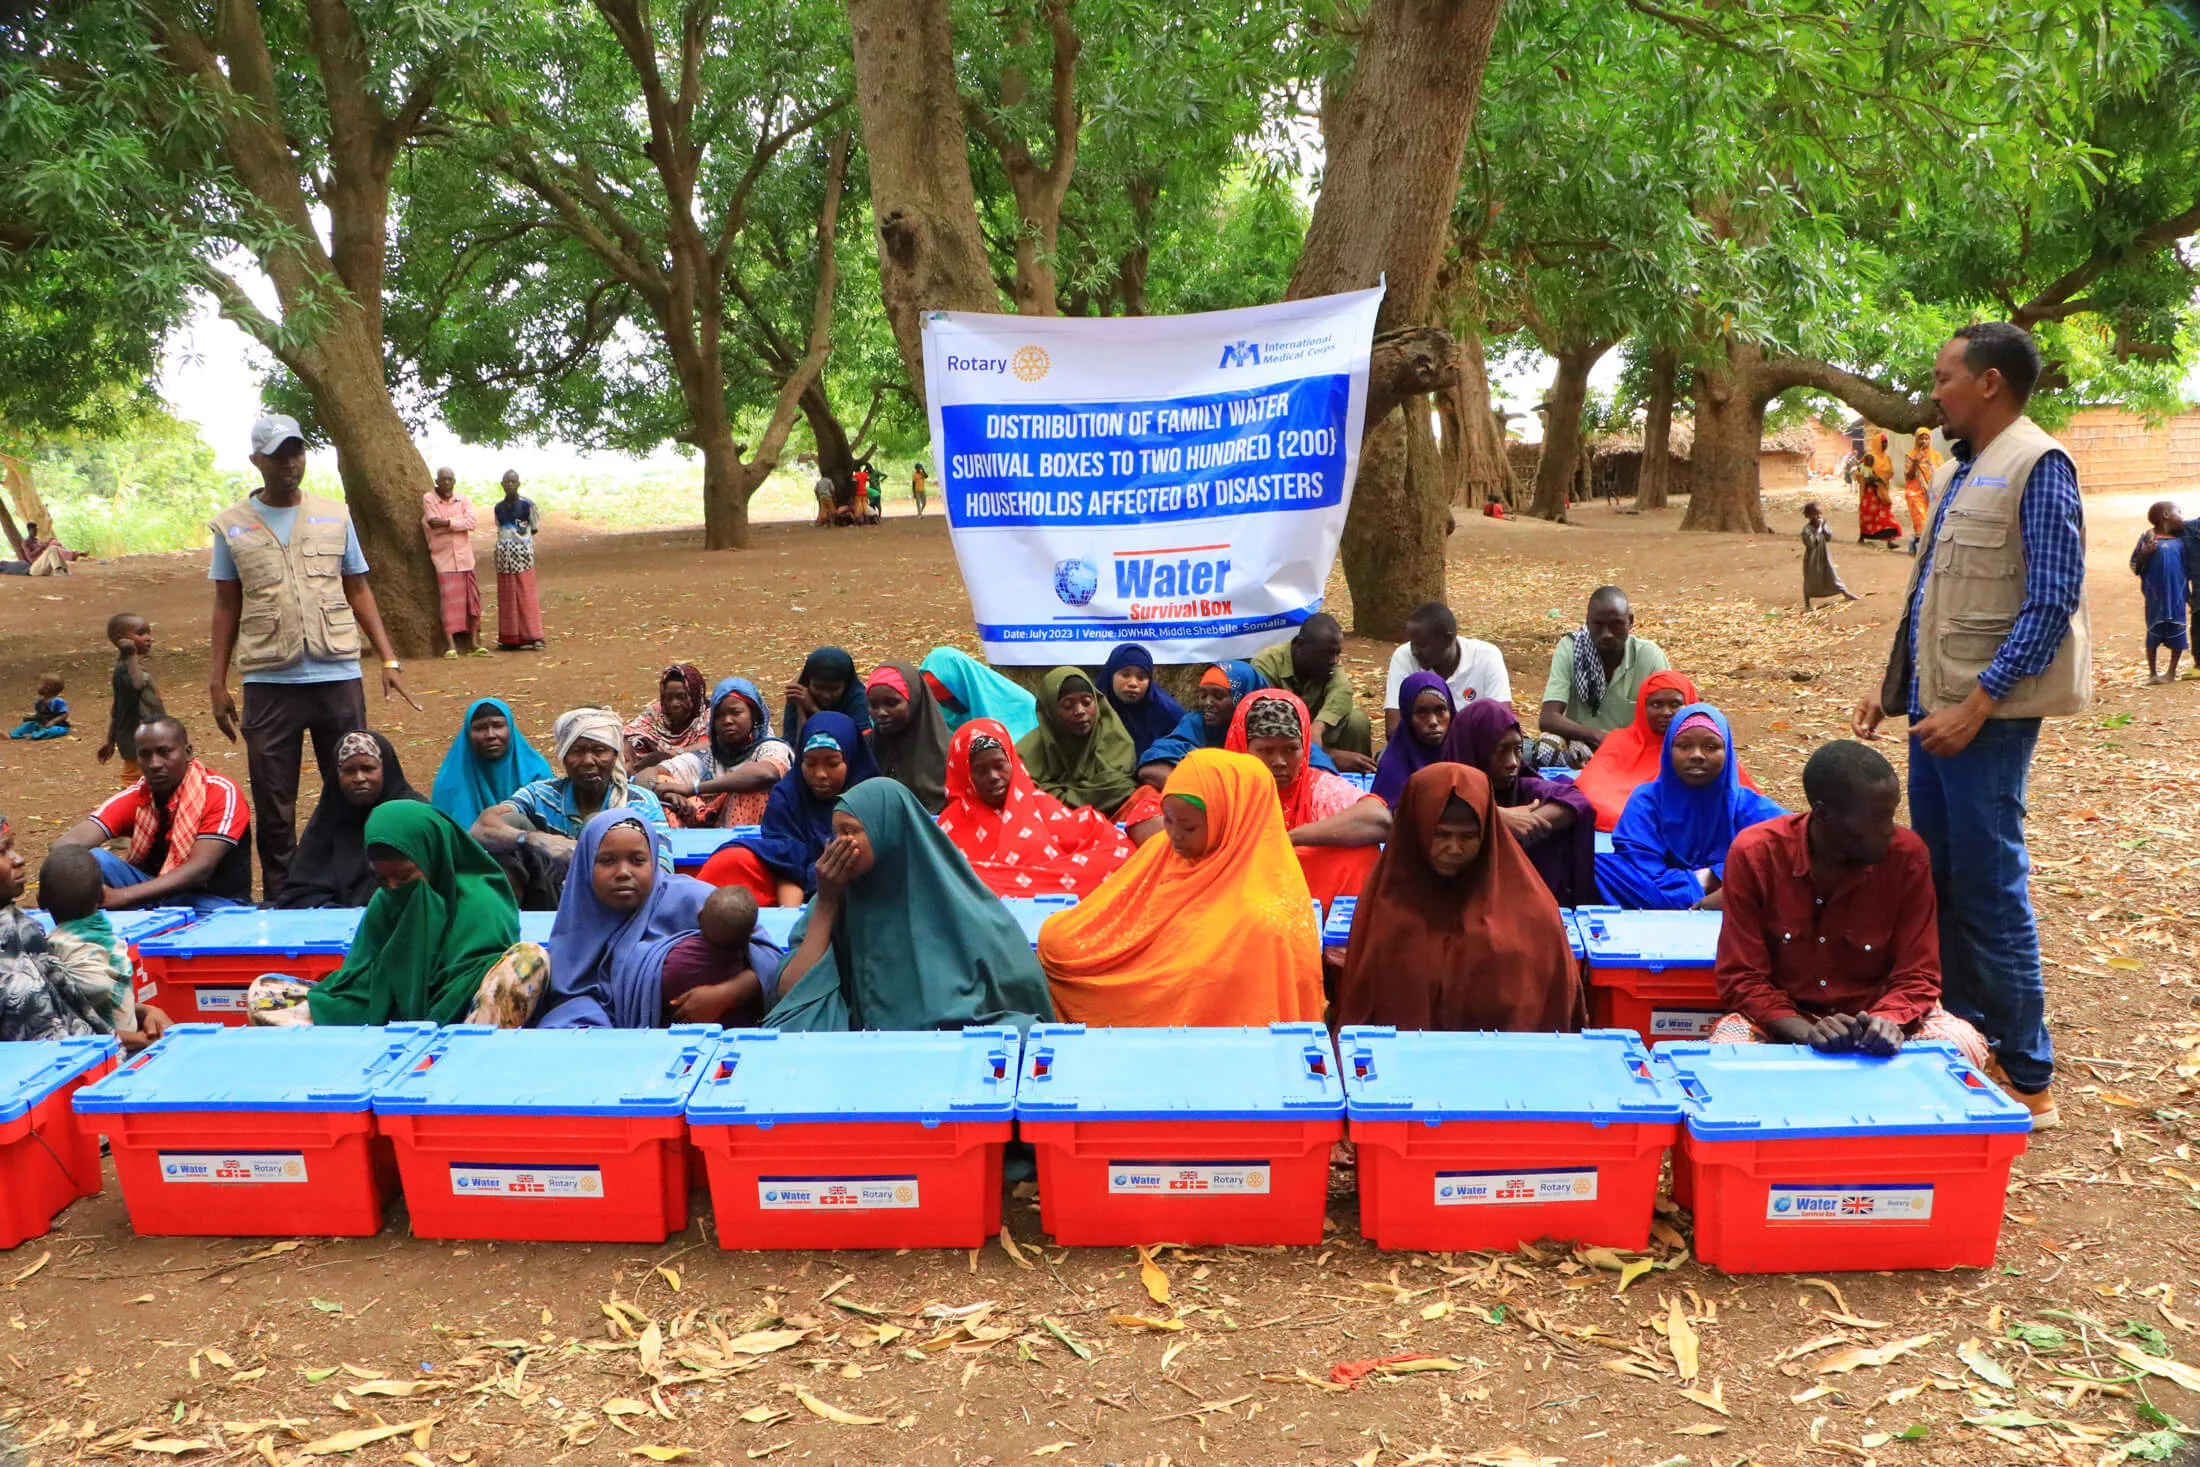 Staff members demonstrate how the water purifier works as families listen and receive their water survival boxes.